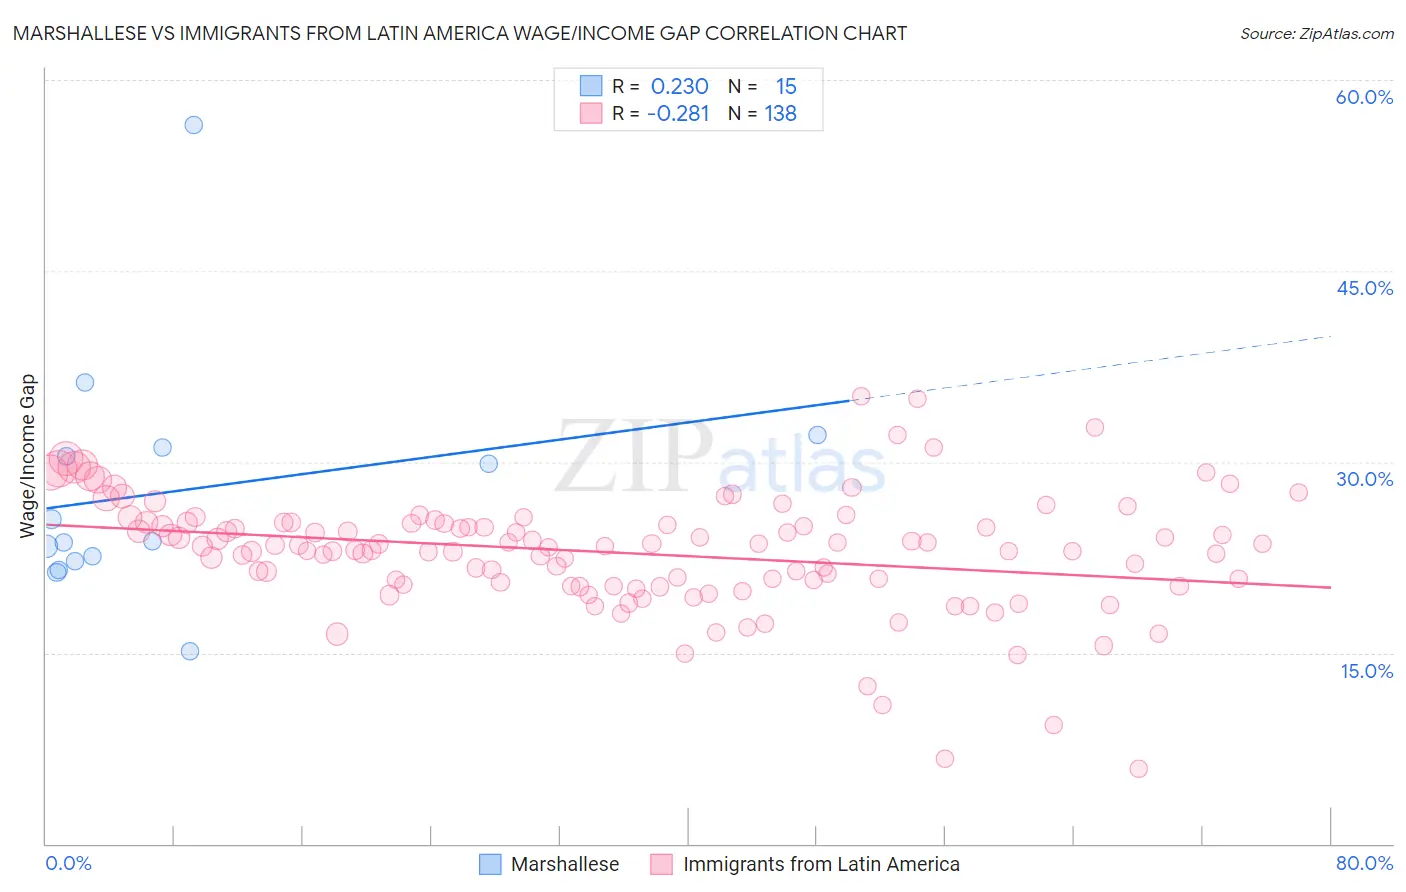 Marshallese vs Immigrants from Latin America Wage/Income Gap